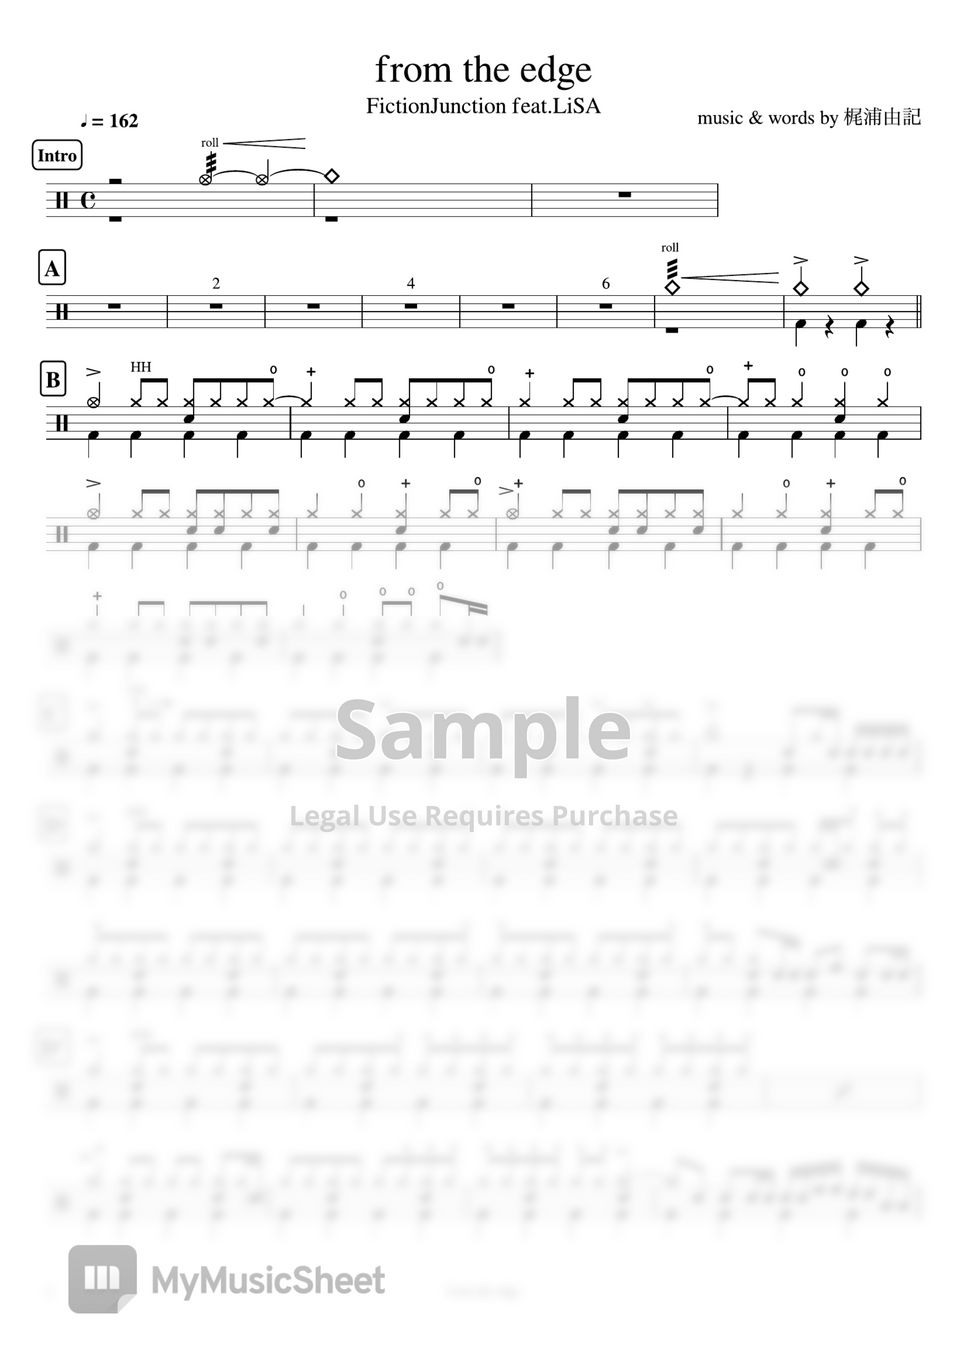 FictionJunction feat.LiSA - from the edge by Cookai's J-pop Drum sheet music!!!